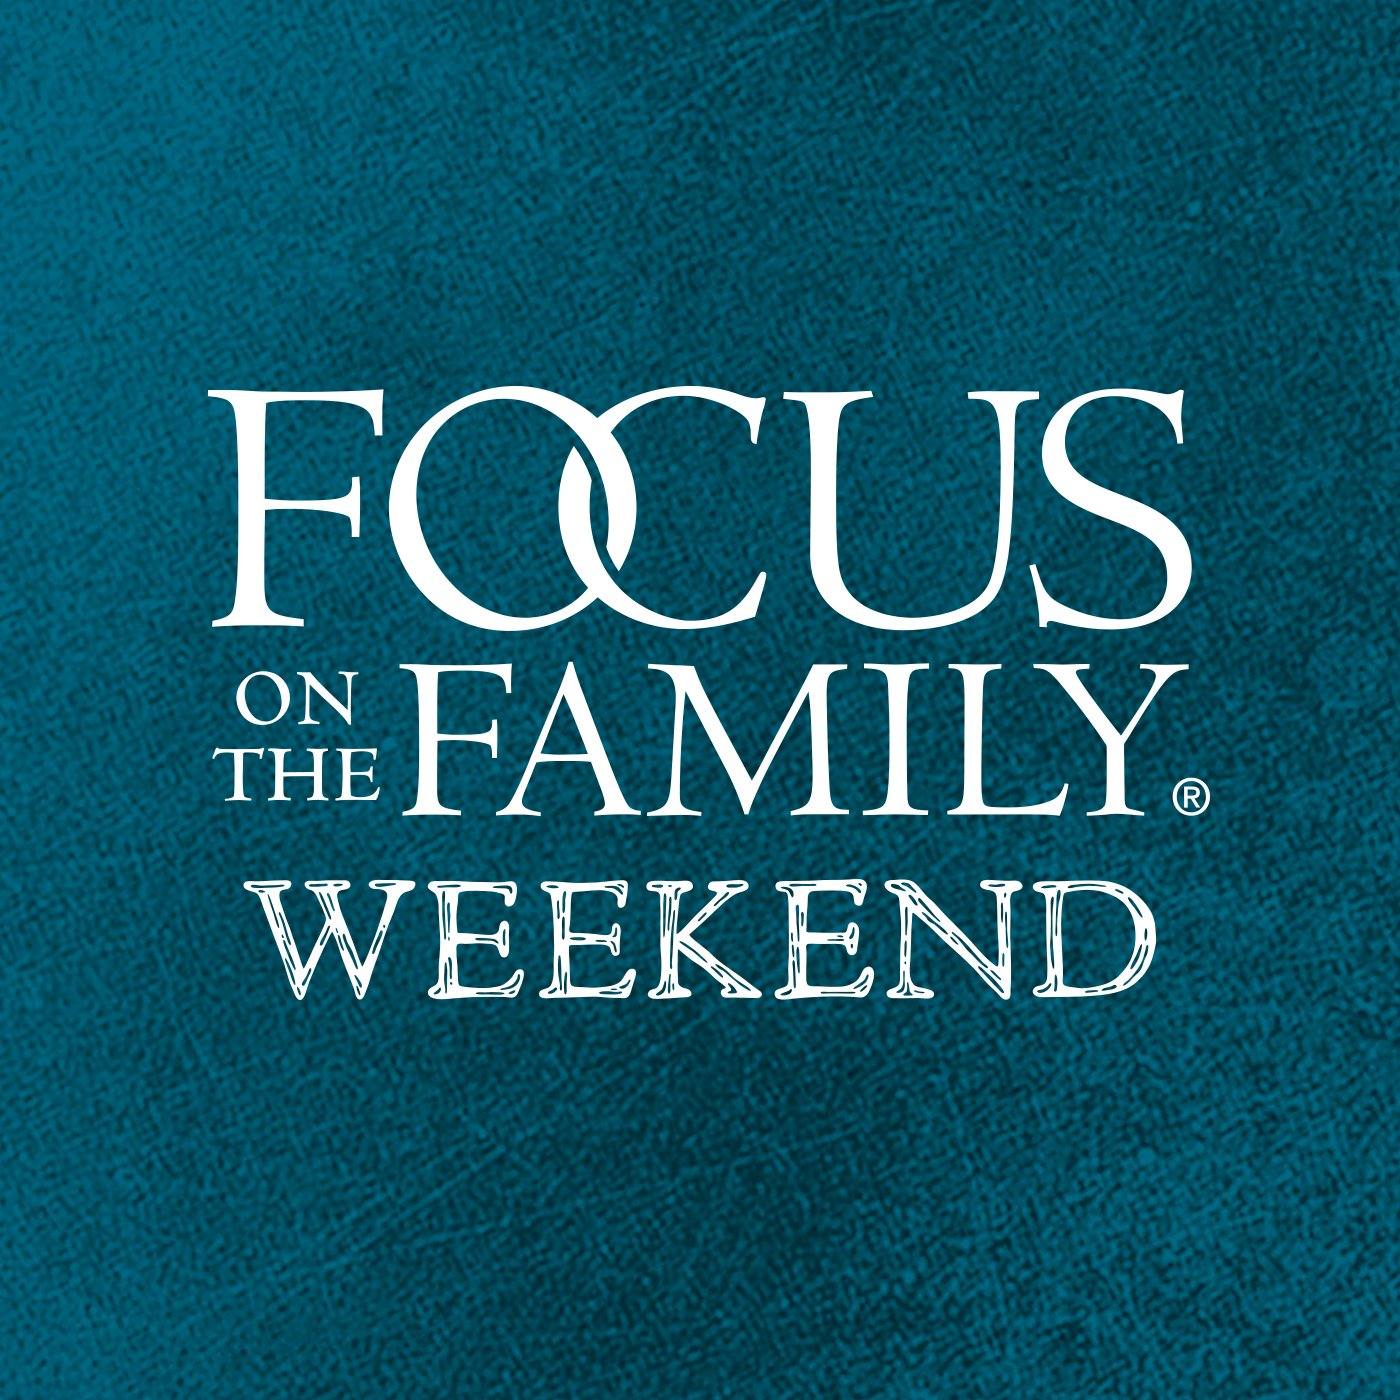 Focus on the Family Weekend: Sep. 17-18, 2022